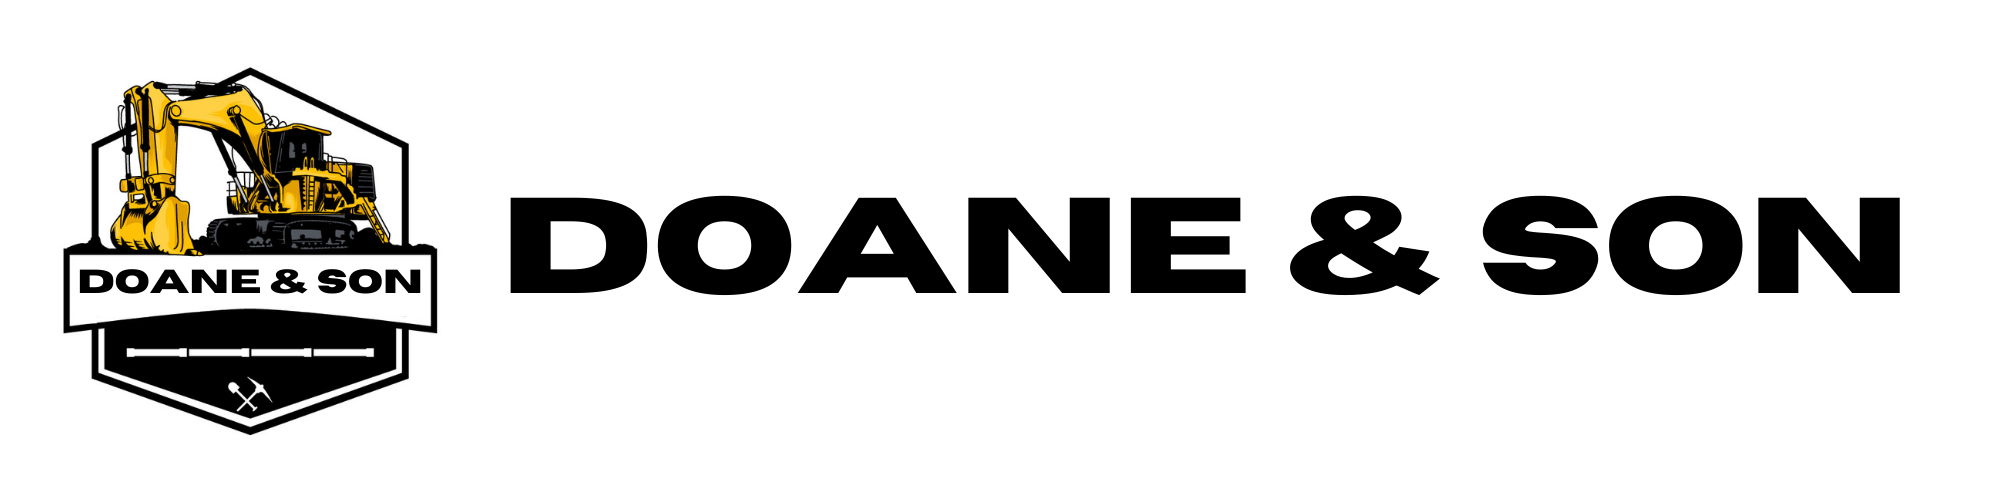 Doane and Son Excavation - Maryland Construction Contractor